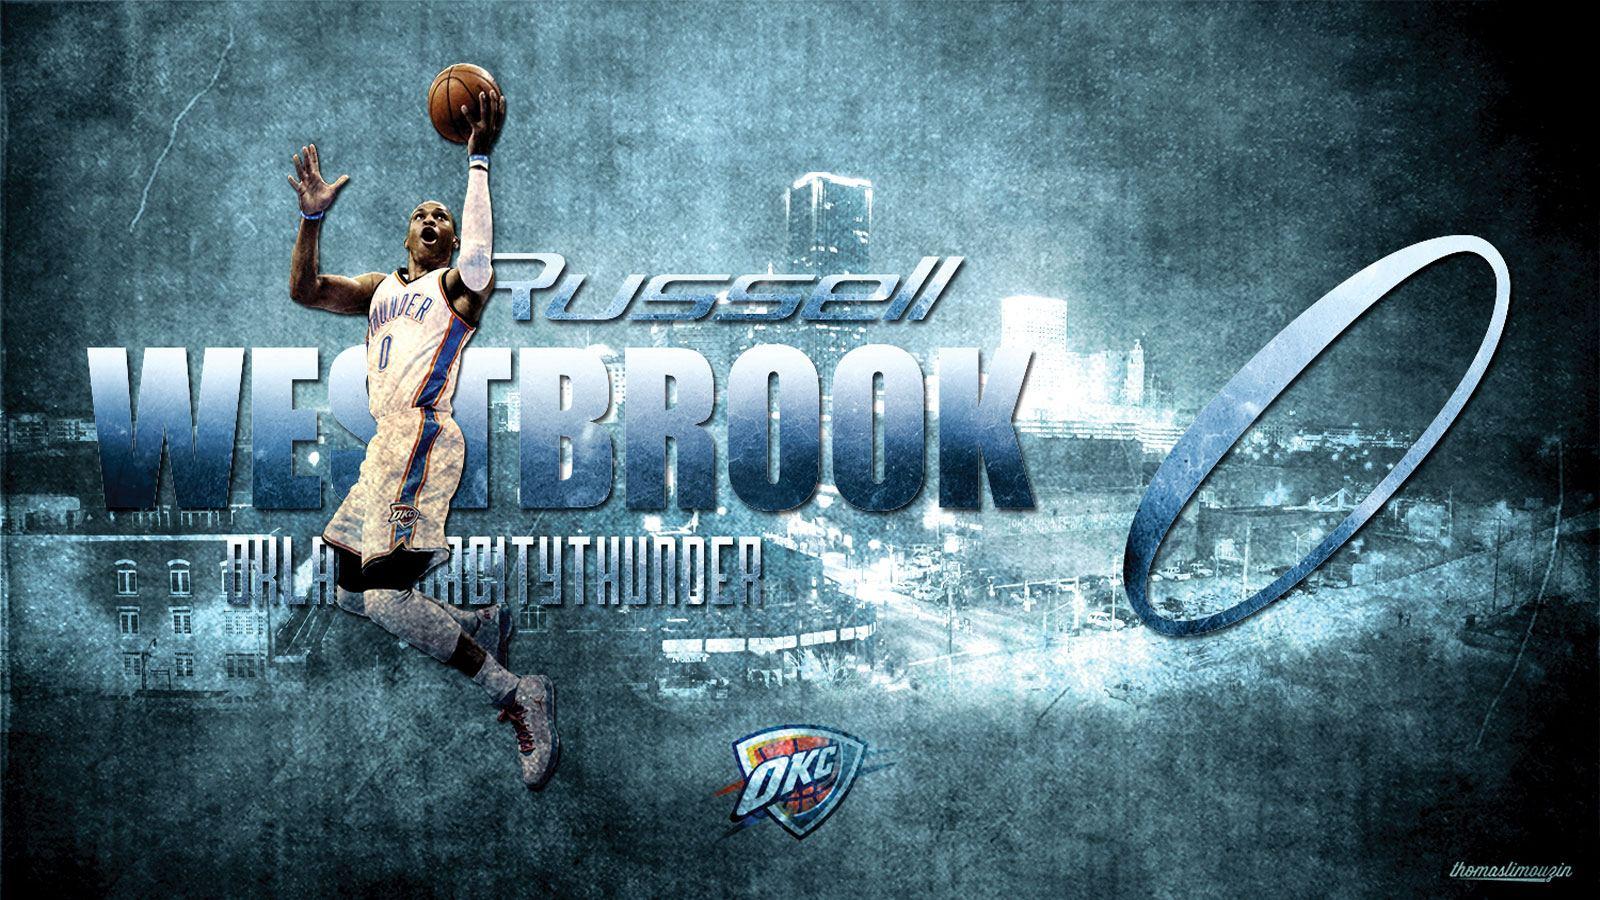 Russell Westbrook wallpapers hd free download